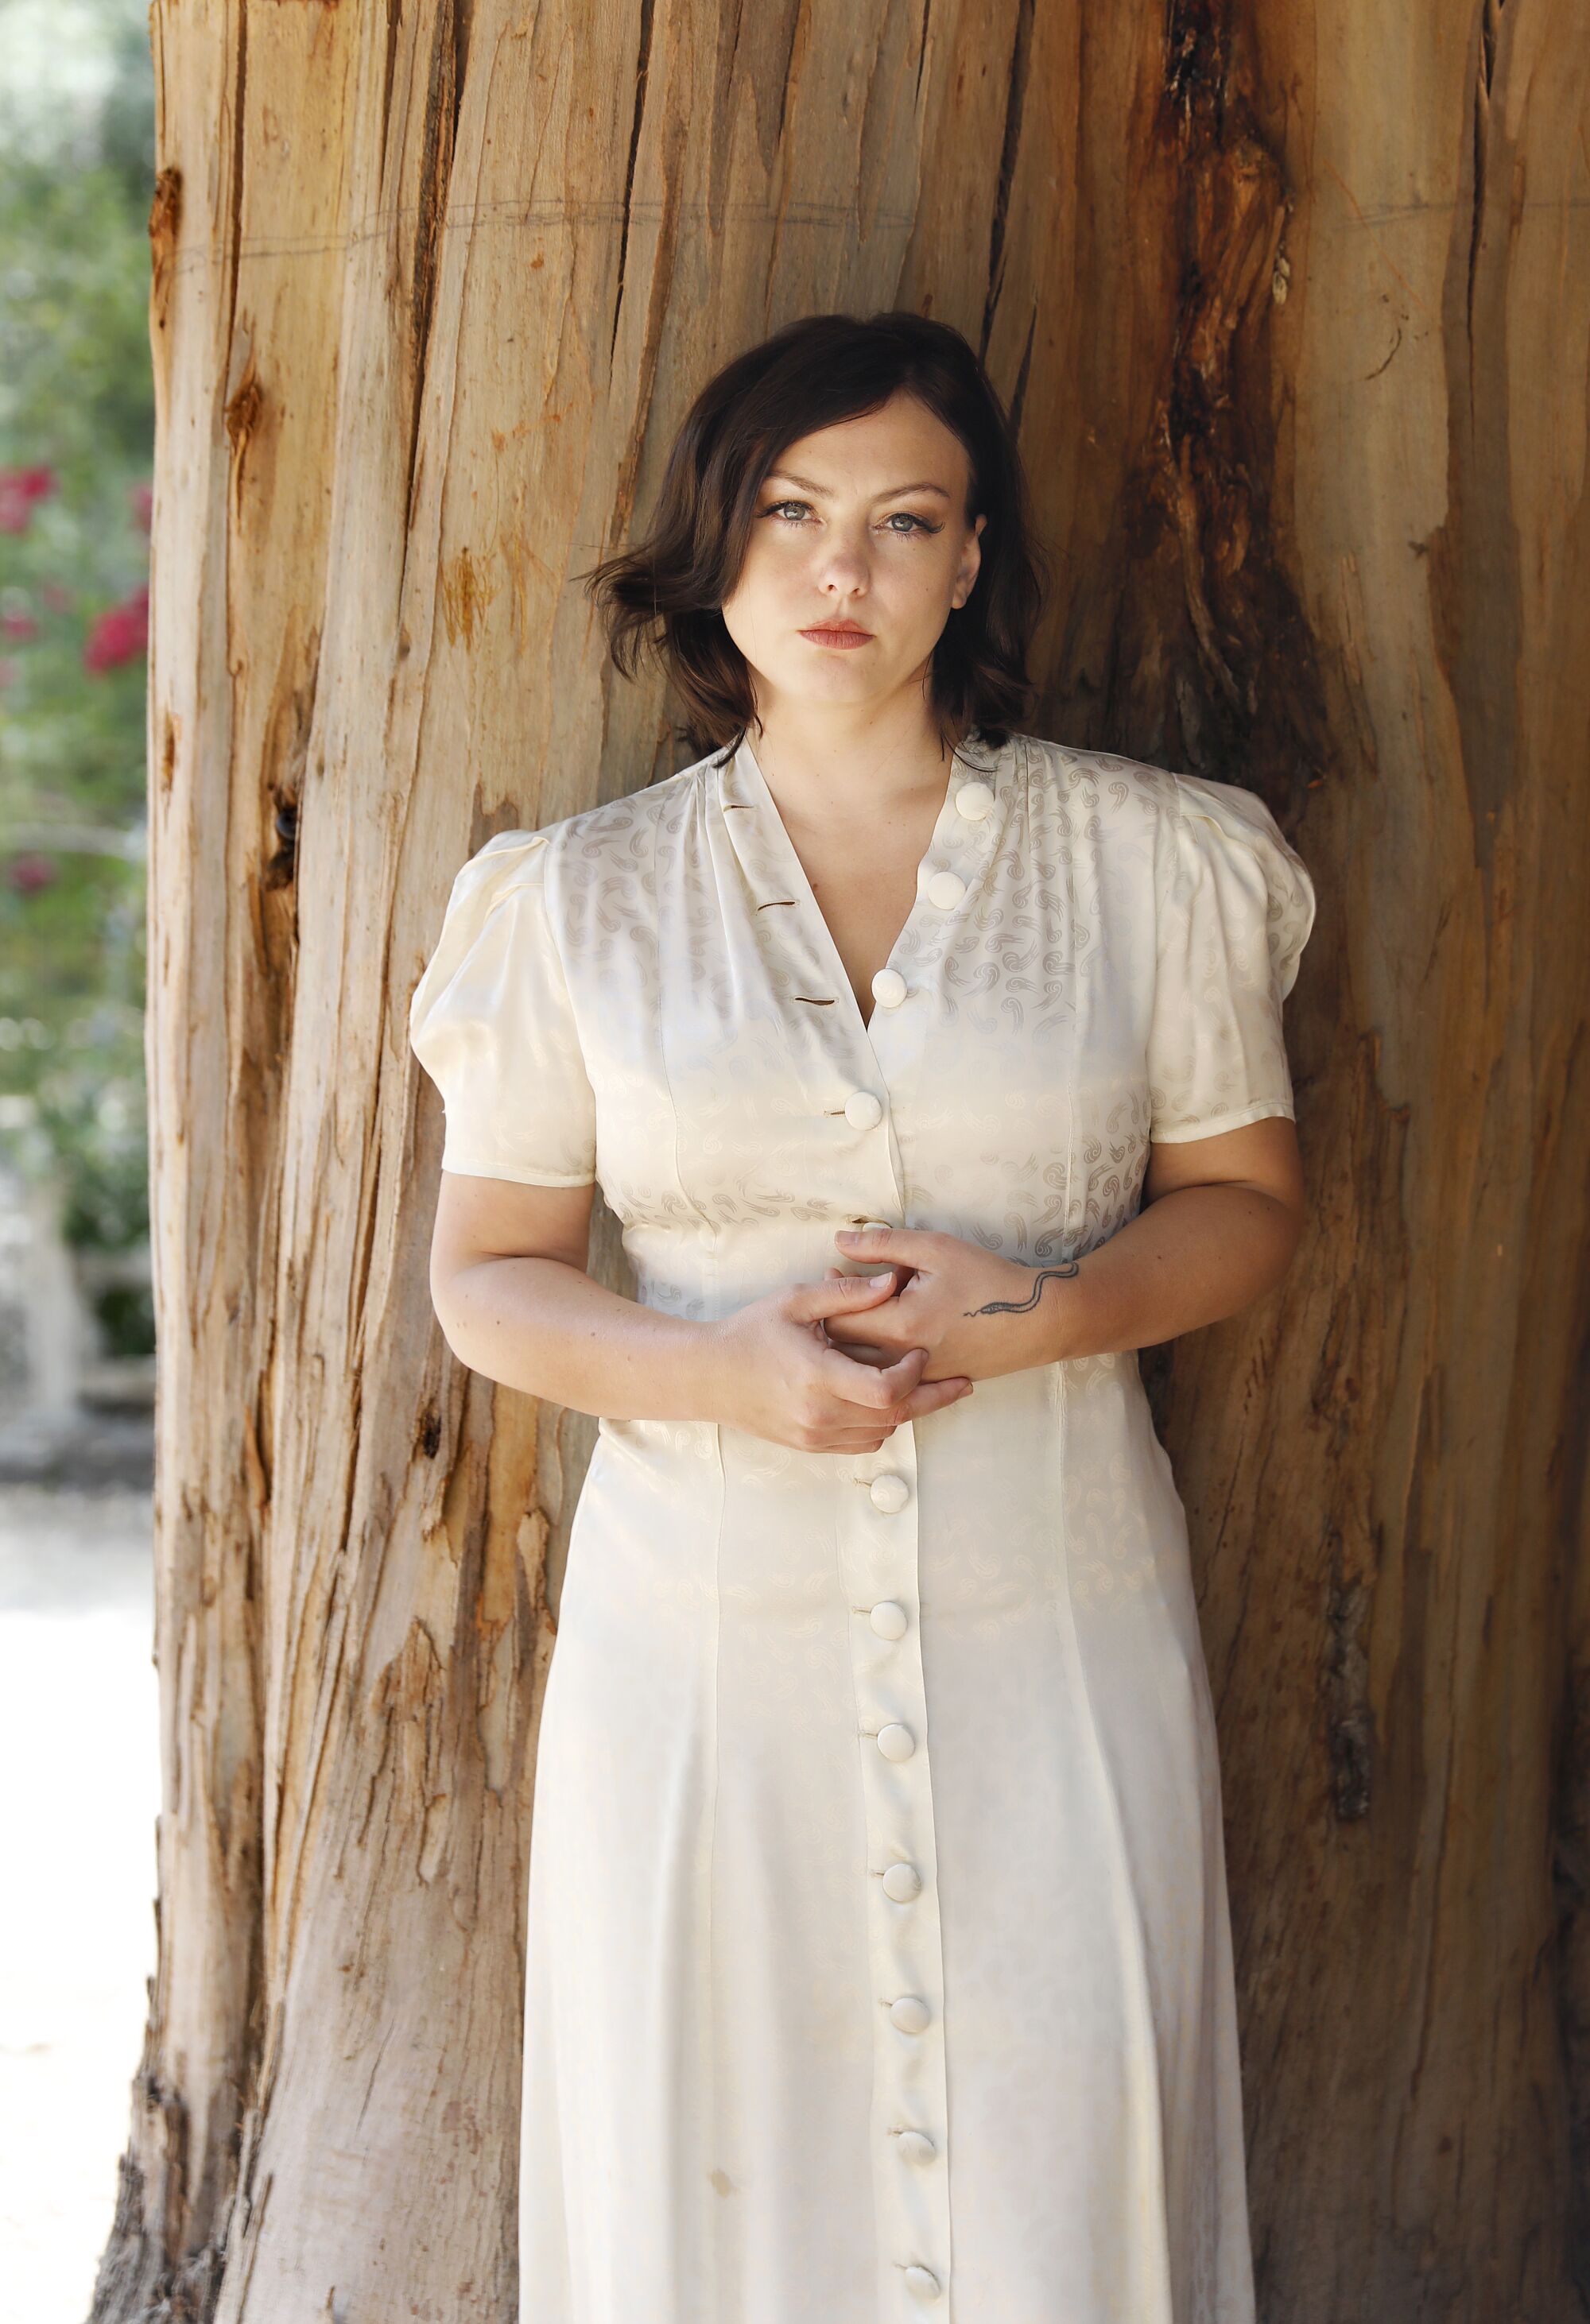 A woman in a white dress leans on a tree trunk